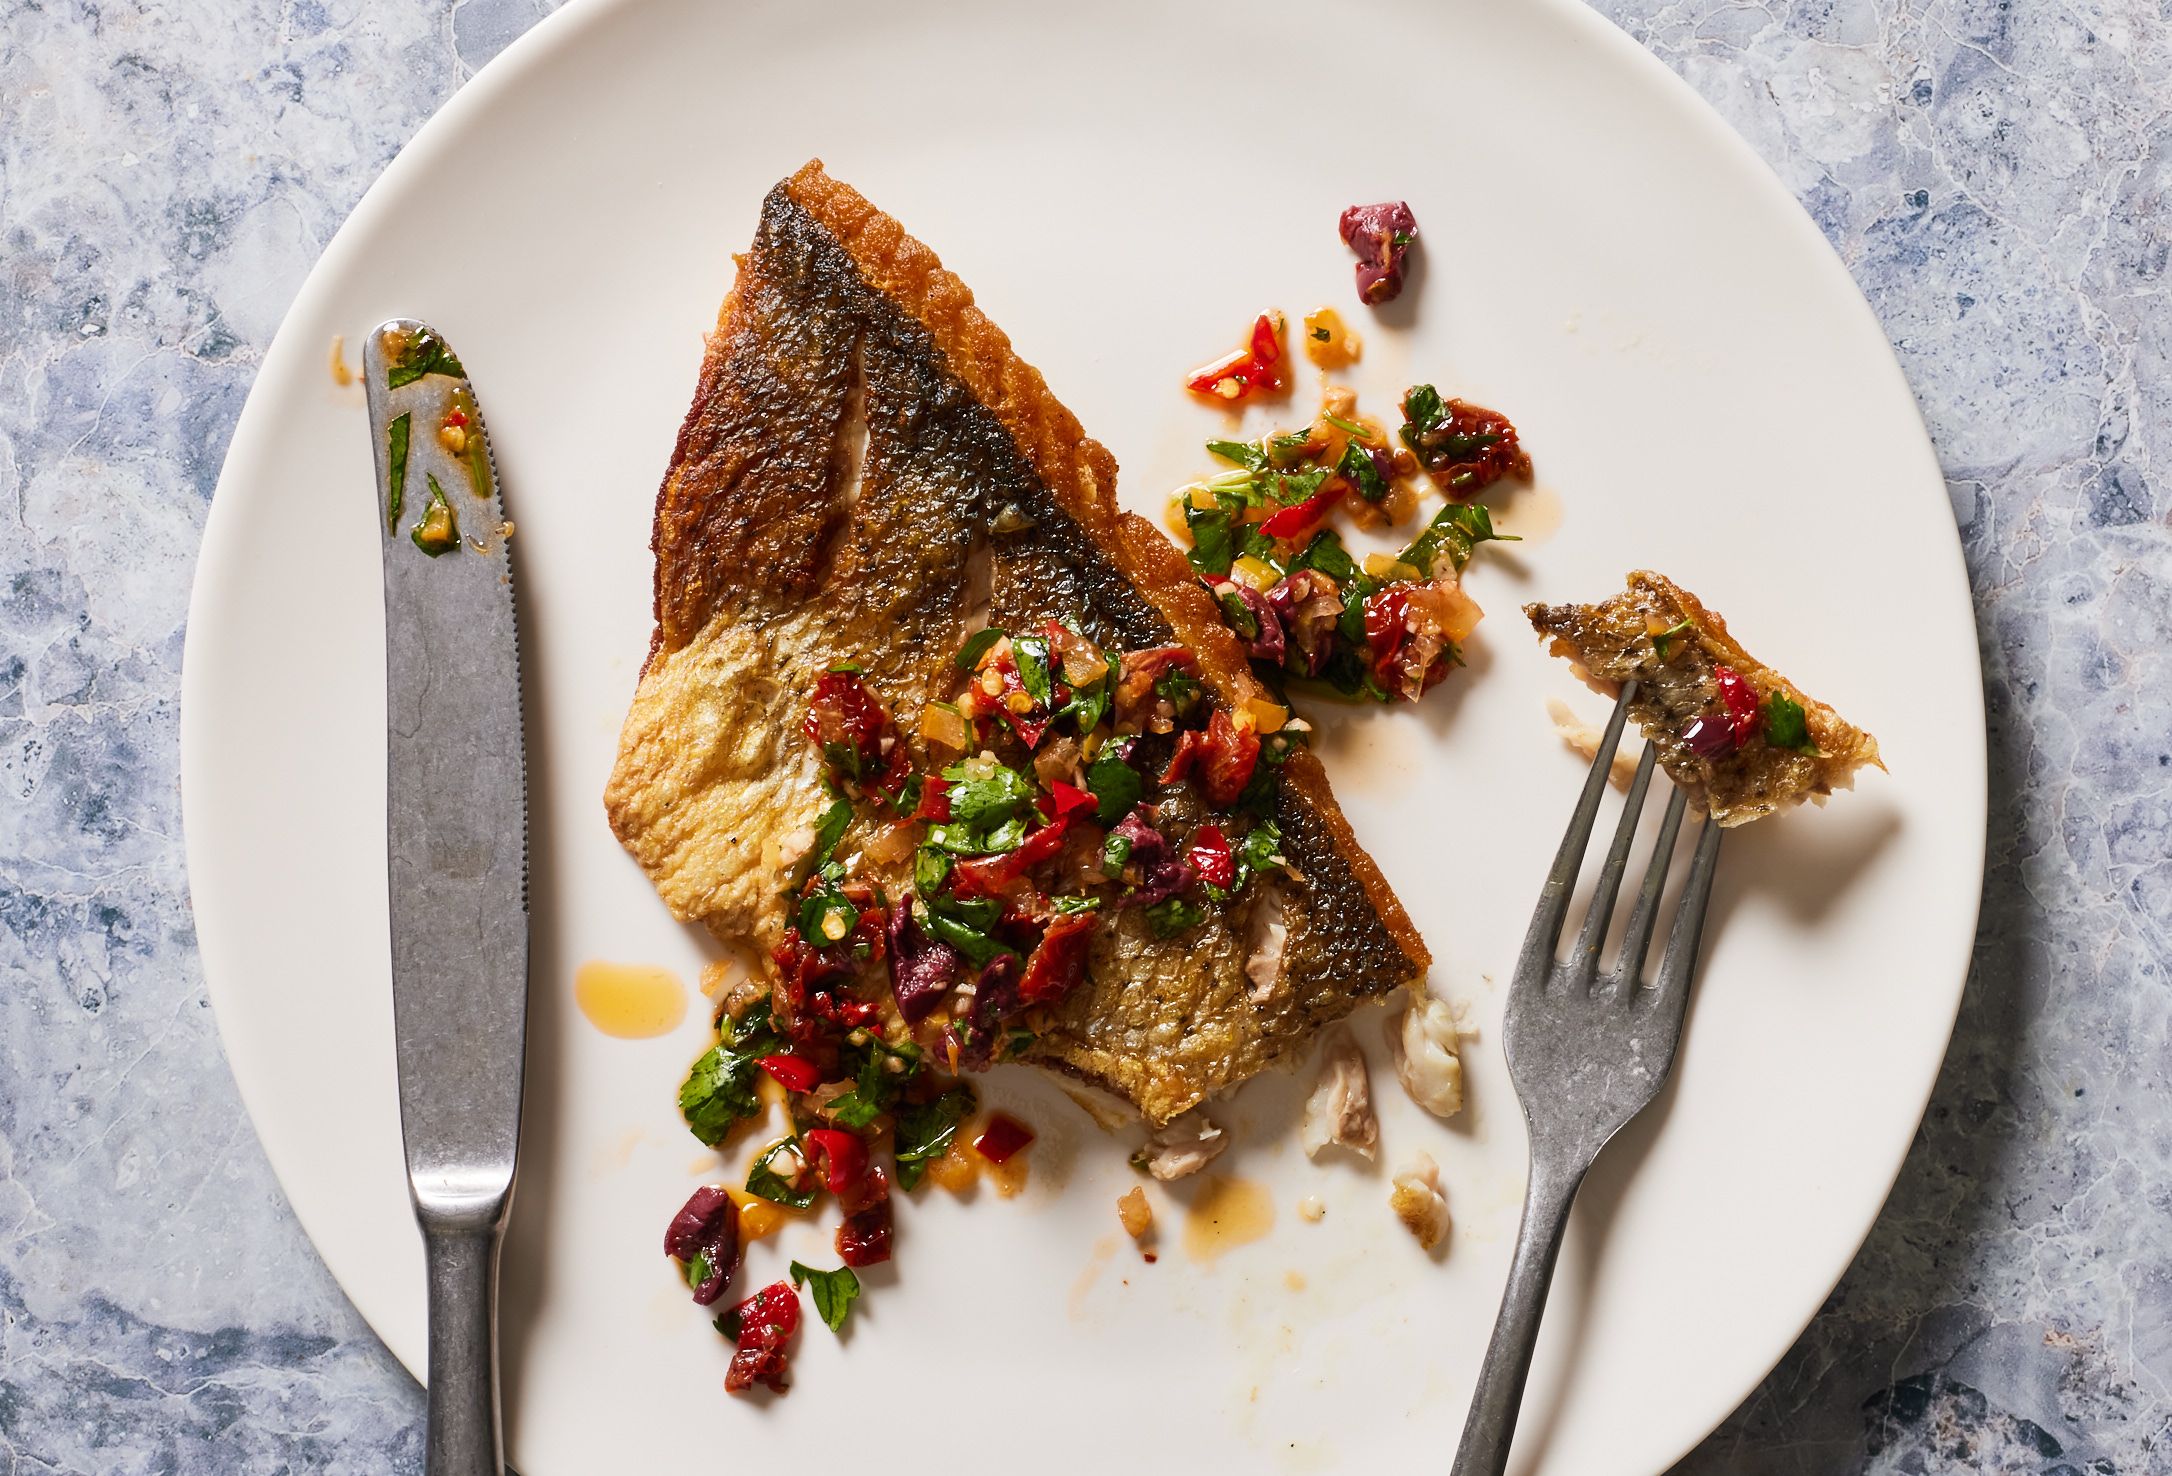 Striped Bass Recipe - How to Make Striped Bass With Herb-Olive Salsa